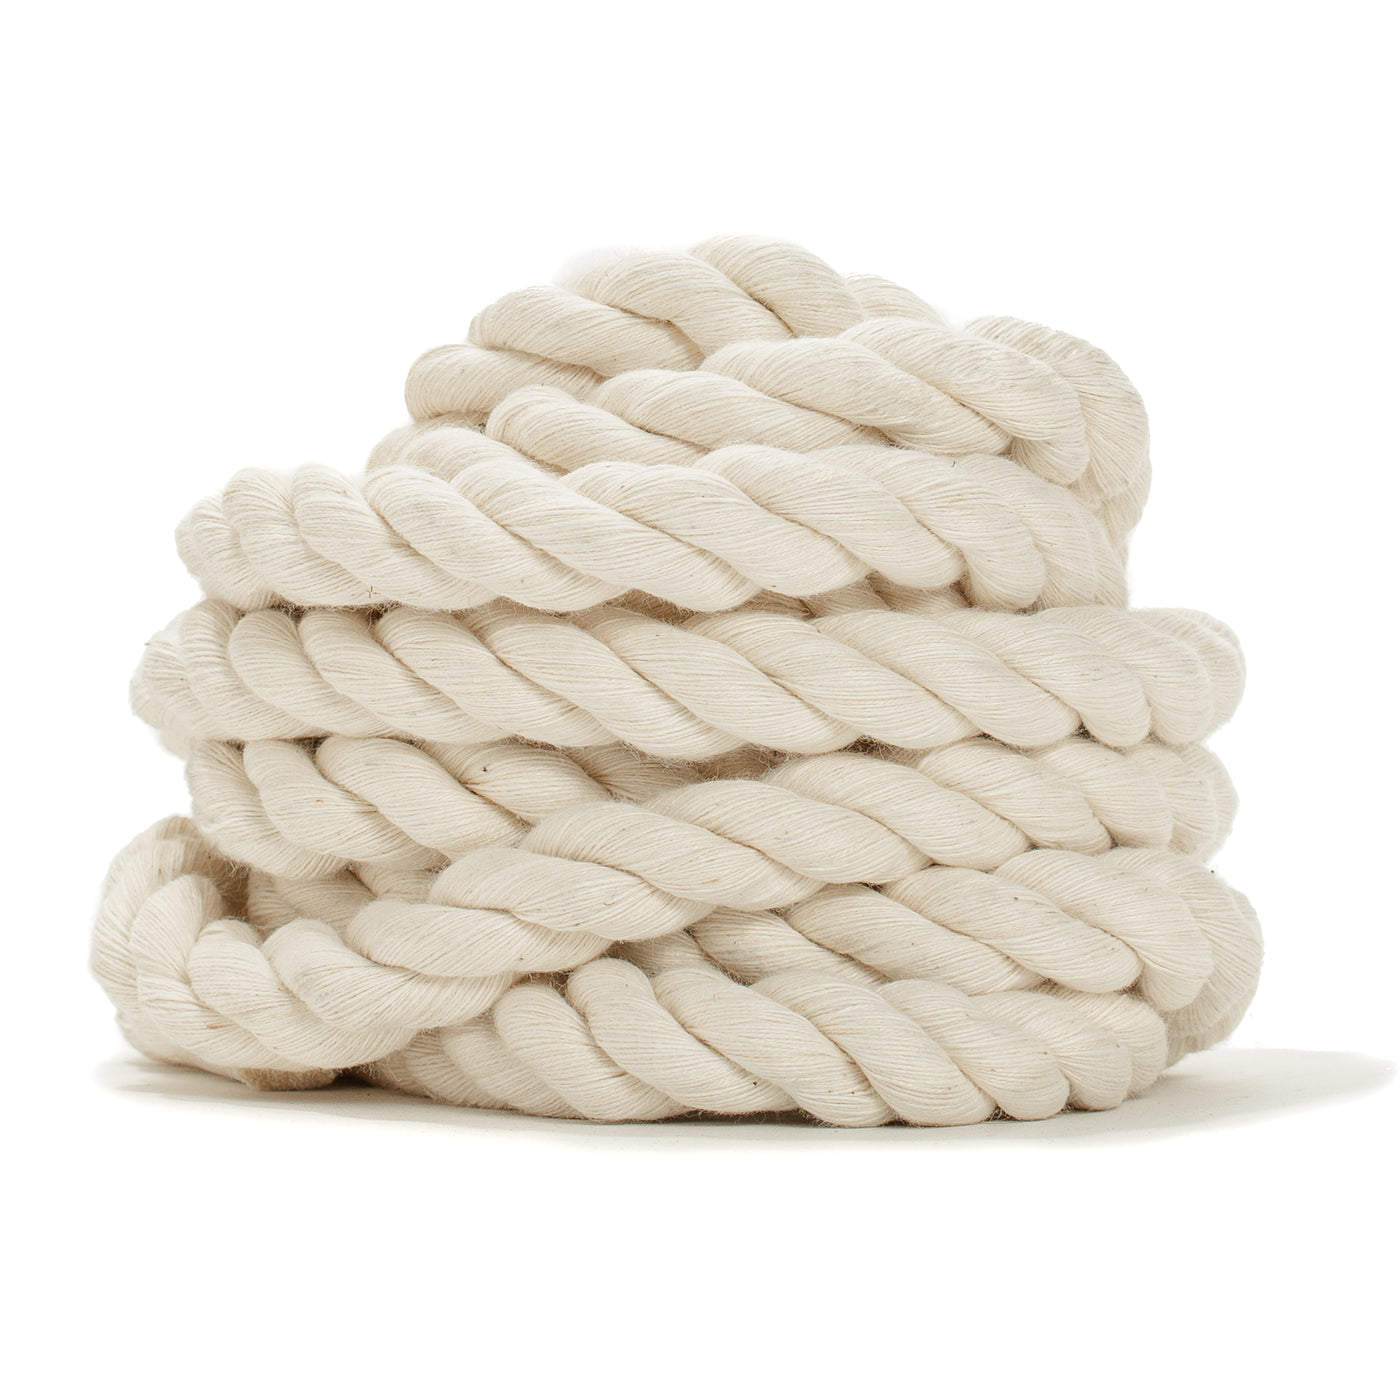 Cotton Rope 13mm & 16mm 3ply Natural, 10 feet